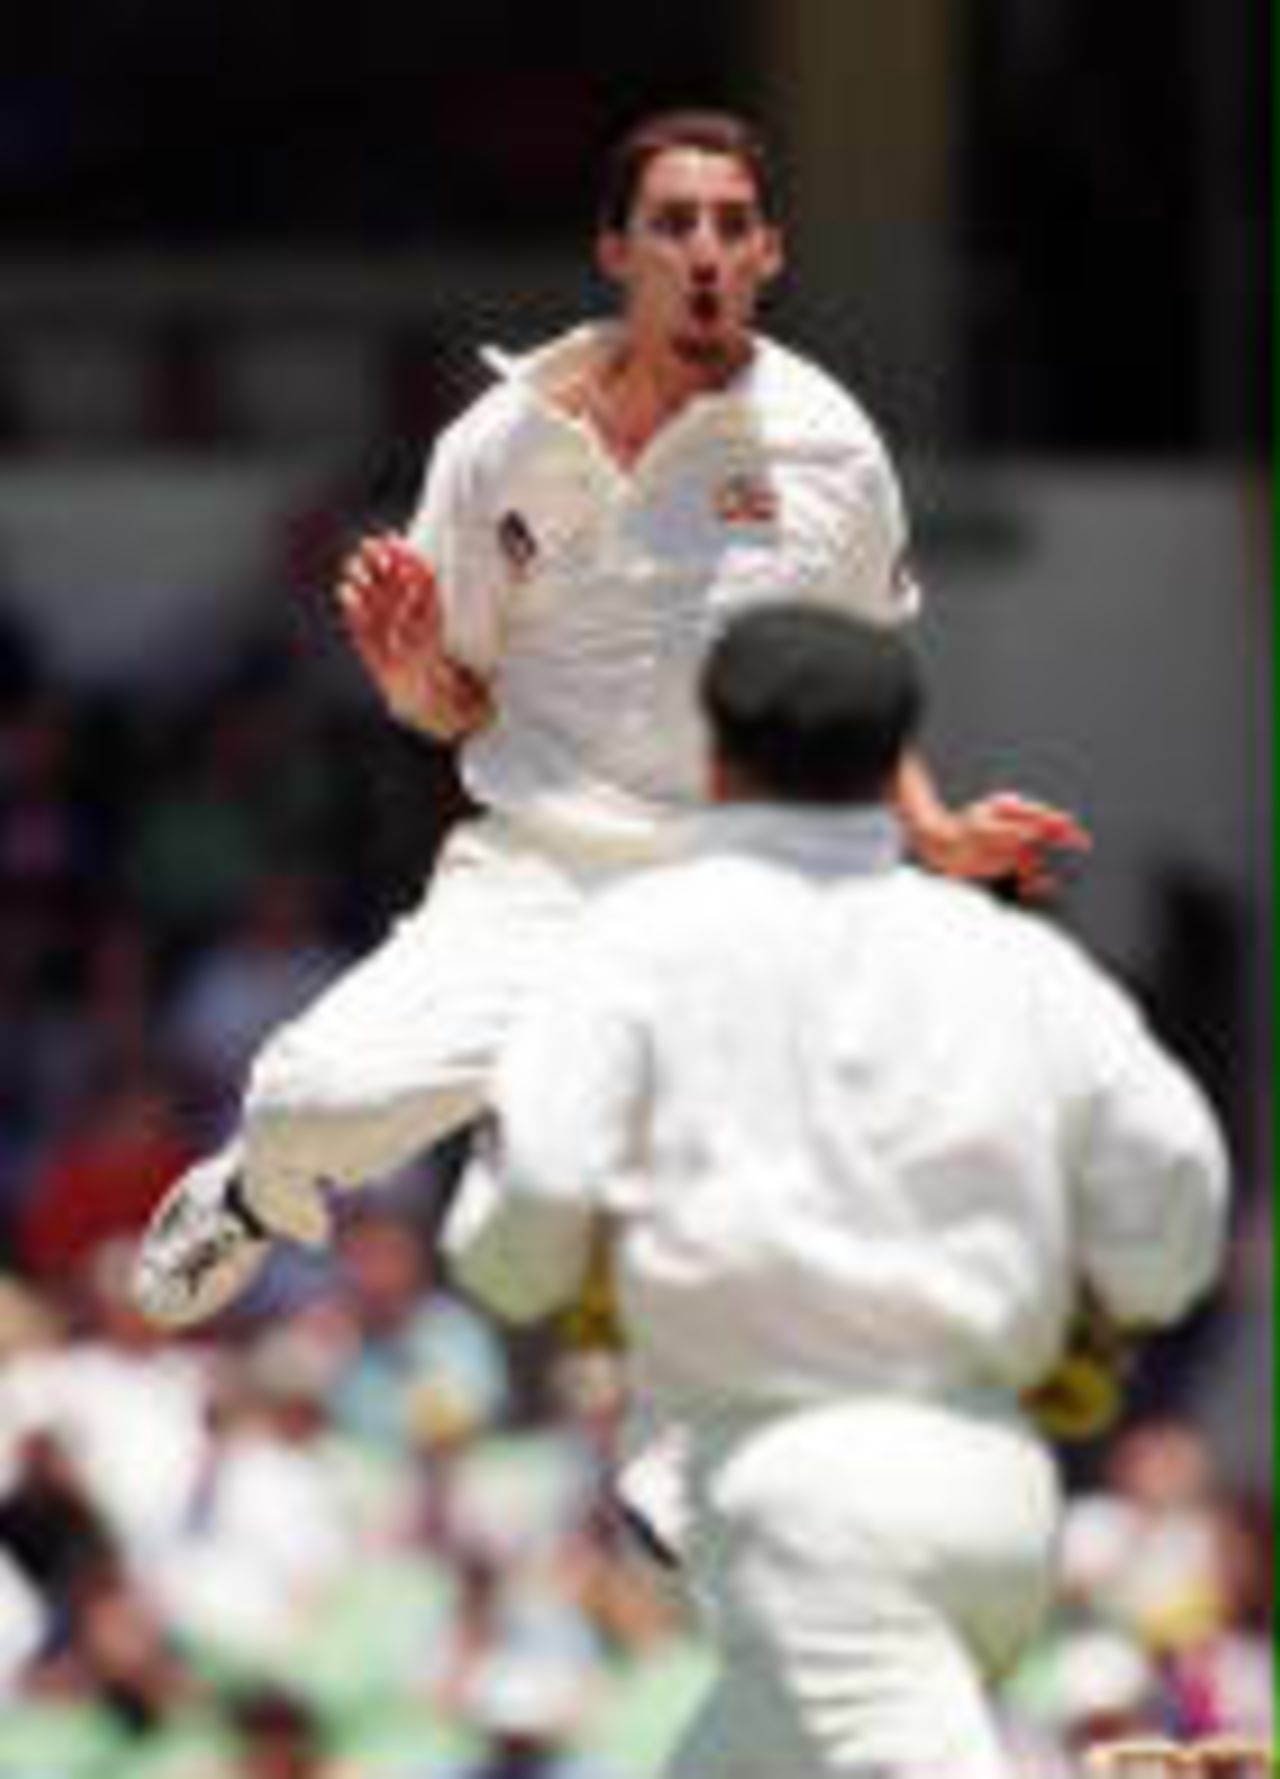 Gillespie jumps for joy after claiming another England wicket The Ashes, 1998/99, 2nd Test  Australia v England WACA Ground, Perth 28,29,30 November 1998